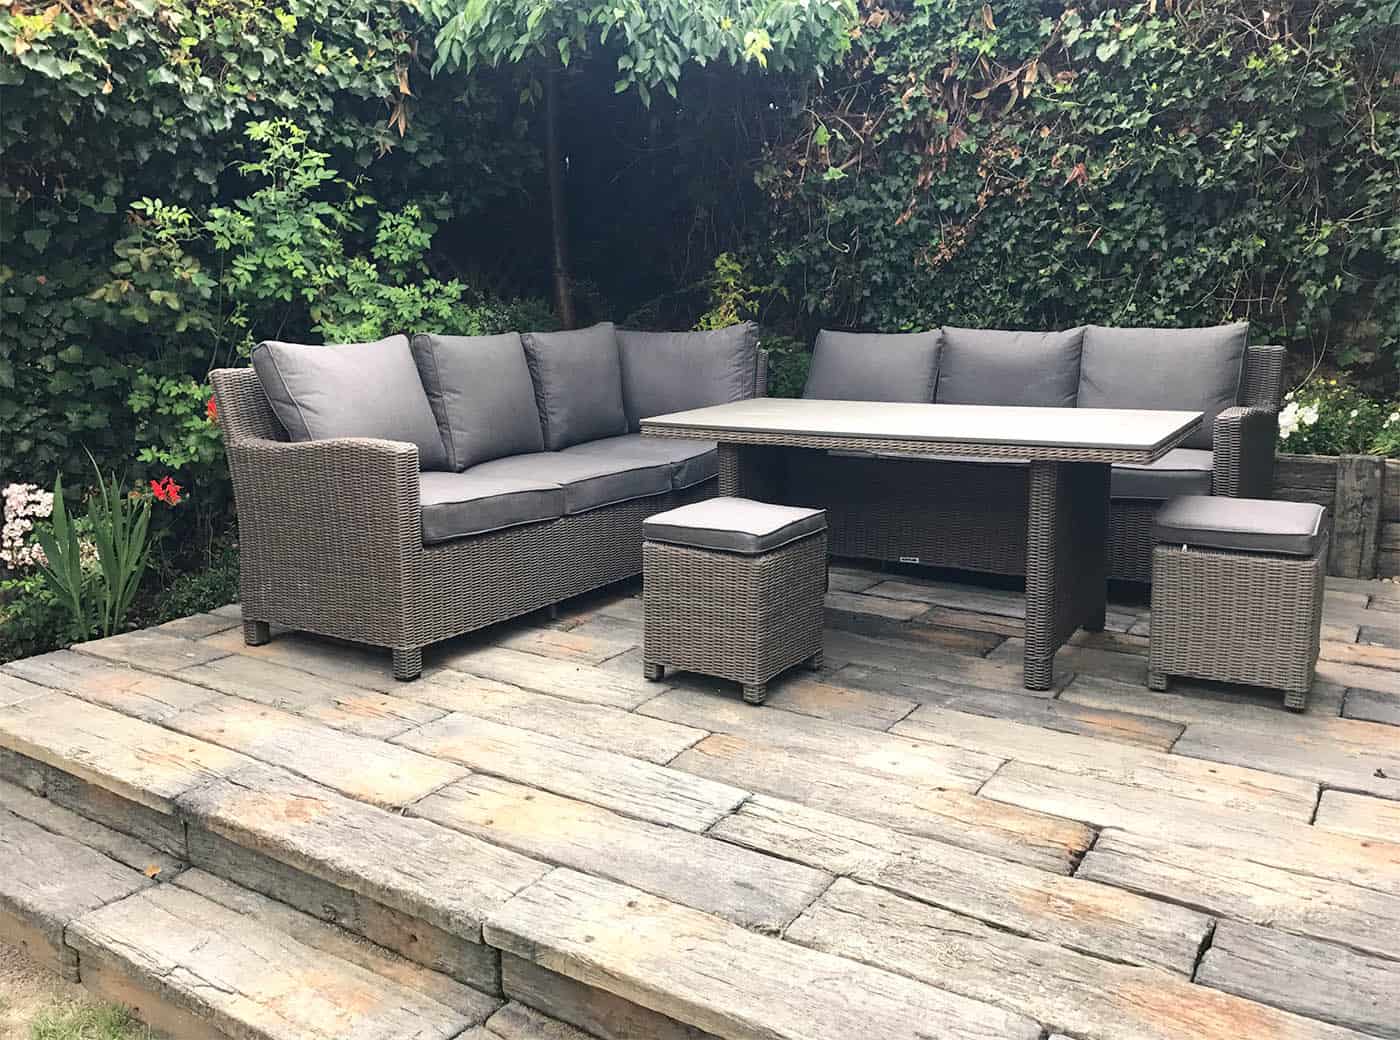 Seating area raised patio installation in North London